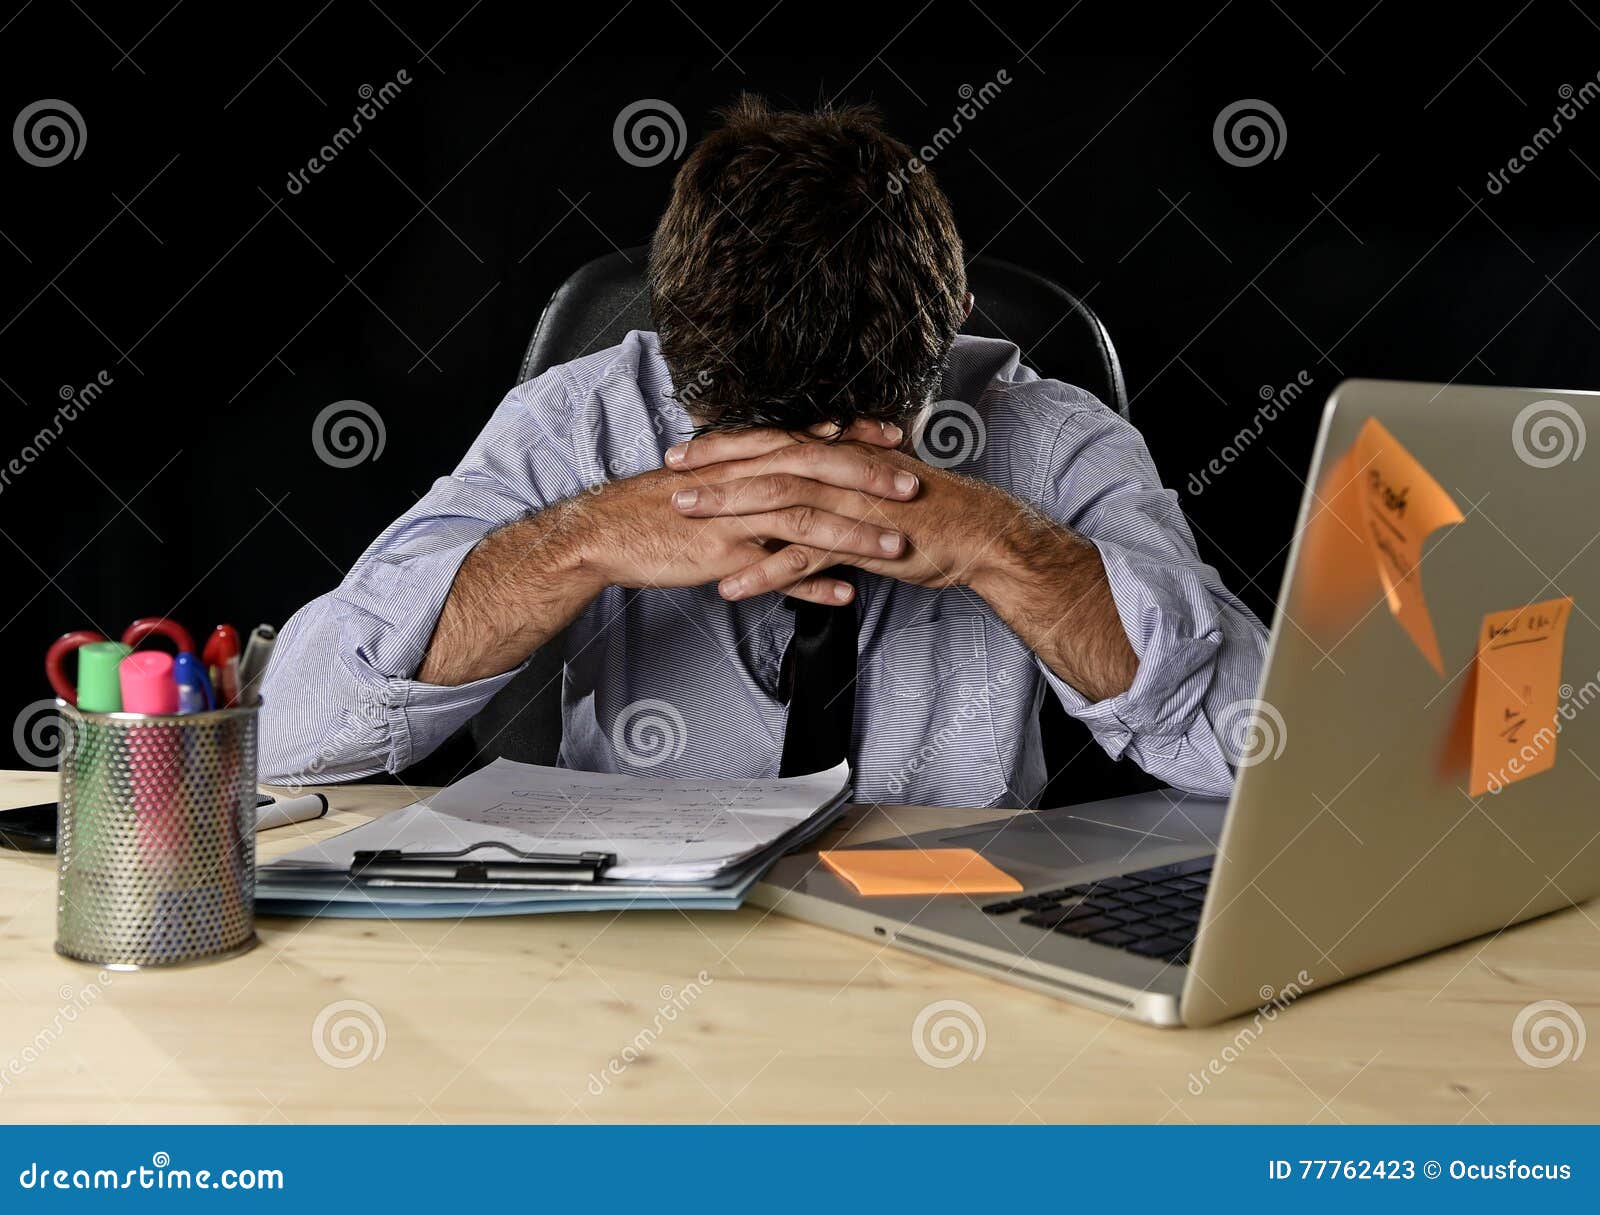 tired businessman suffering work stress wasted worried busy in office late at night with laptop computer